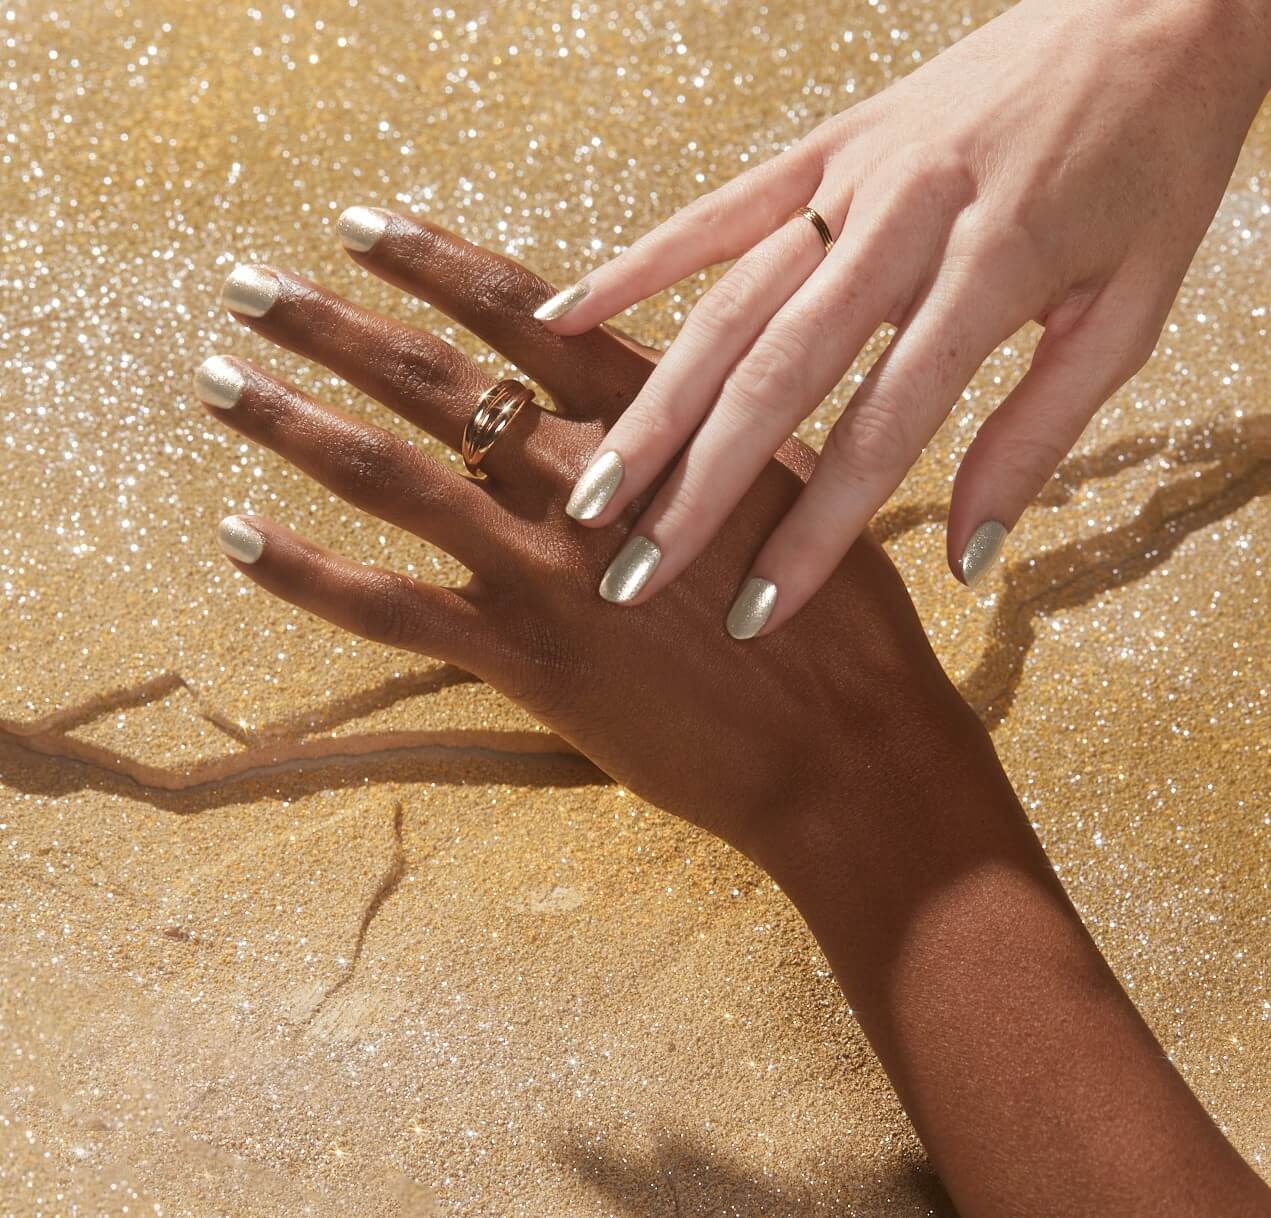 Two different people show gold nails over a bed of gold powder